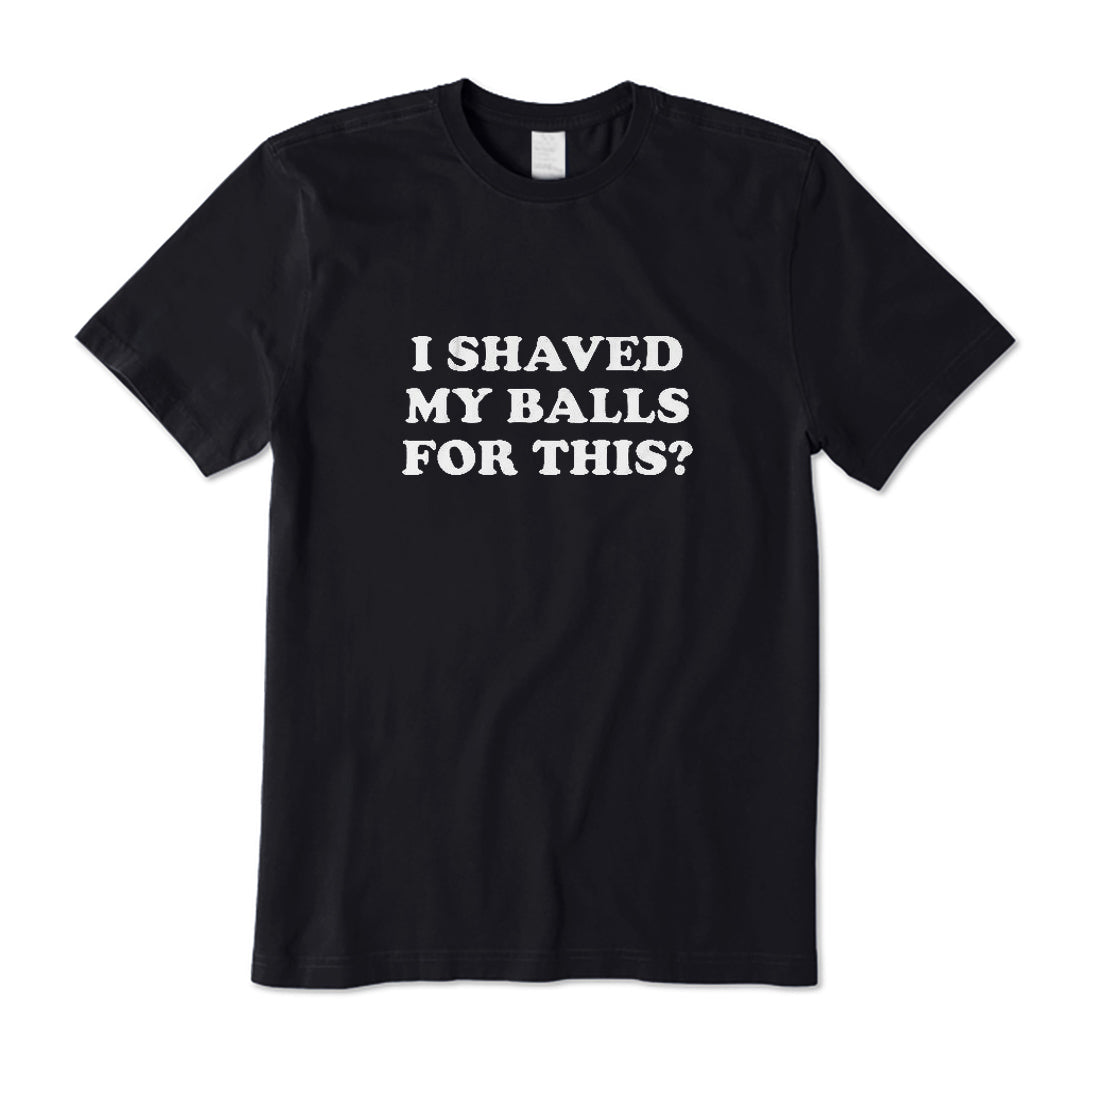 I Shaved My Balls For This? T-Shirt